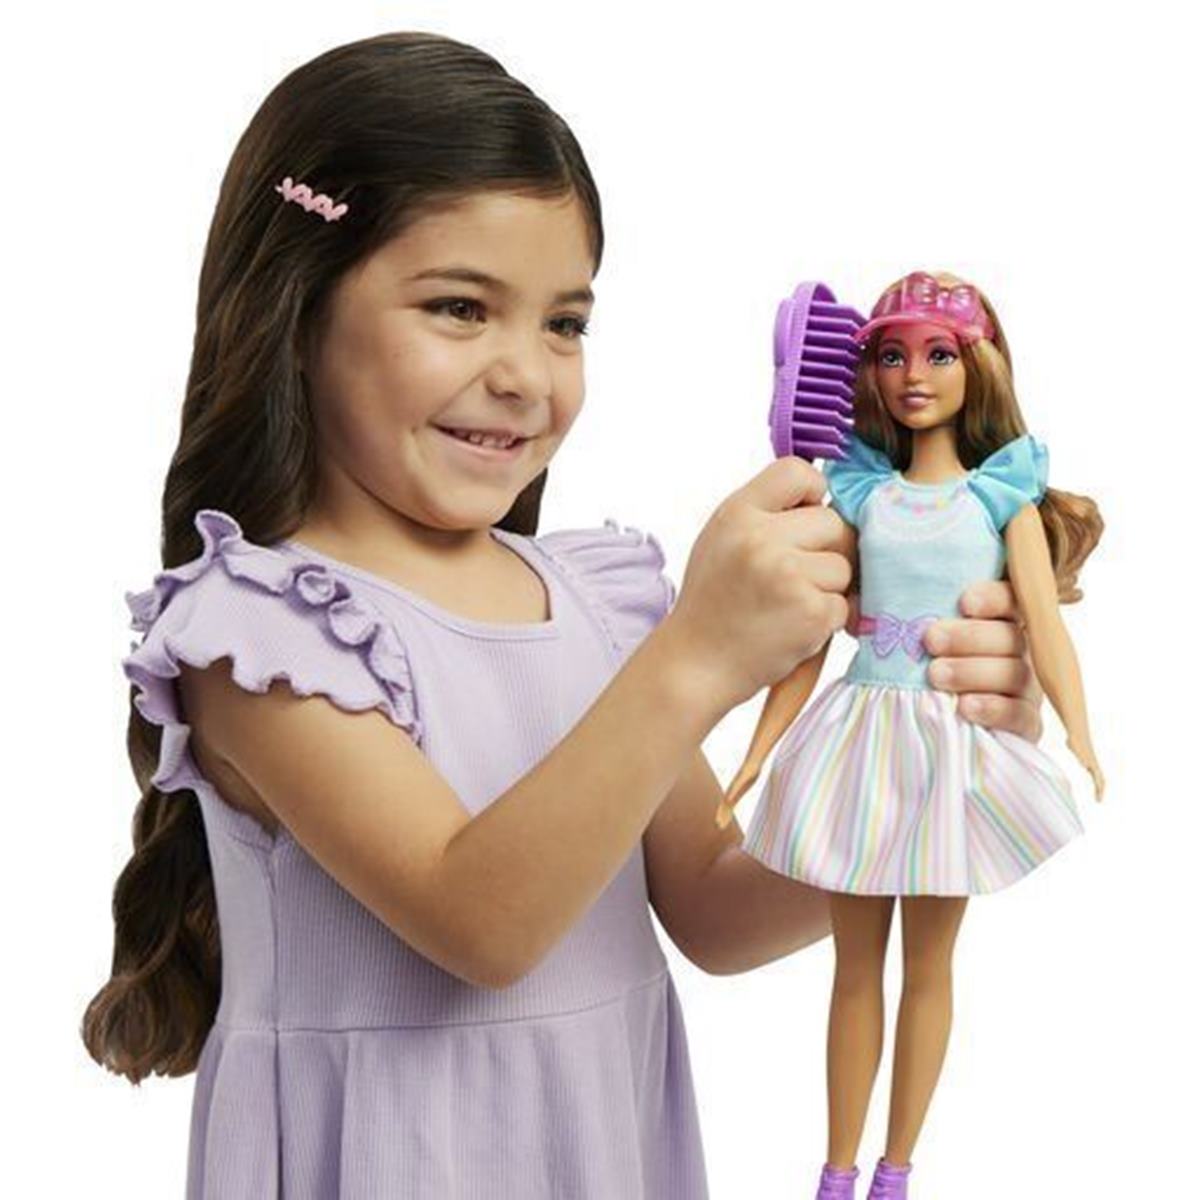 New, taller Barbie doll is aimed at kids as young as 3 | Lifestyle ...